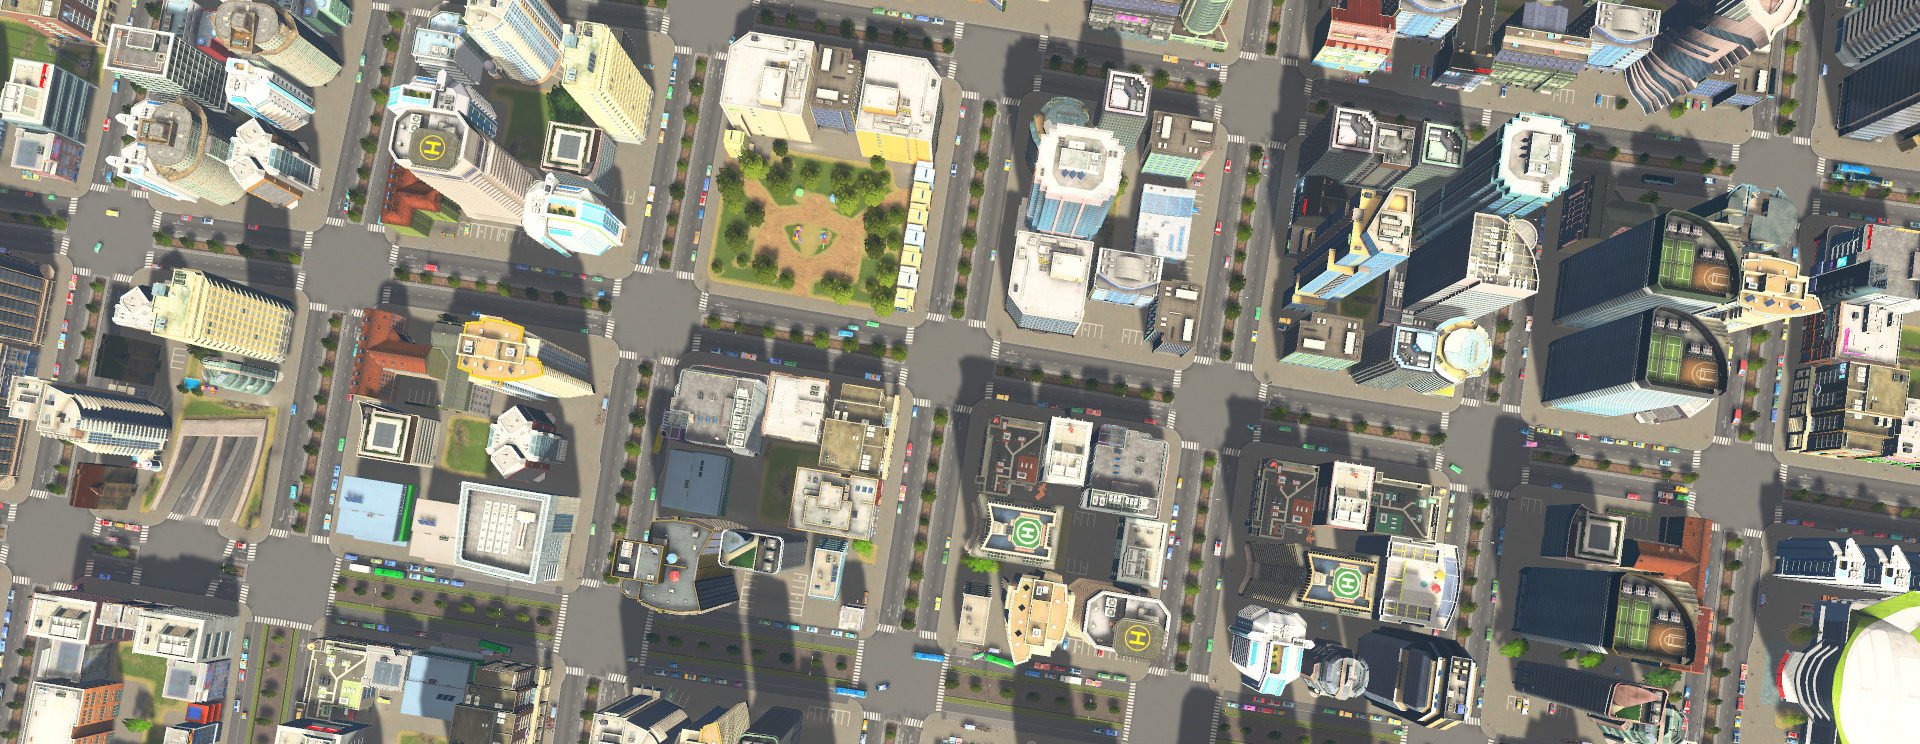 Cities Skylines 2 Gameplay Improvements: What Should the Devs Do